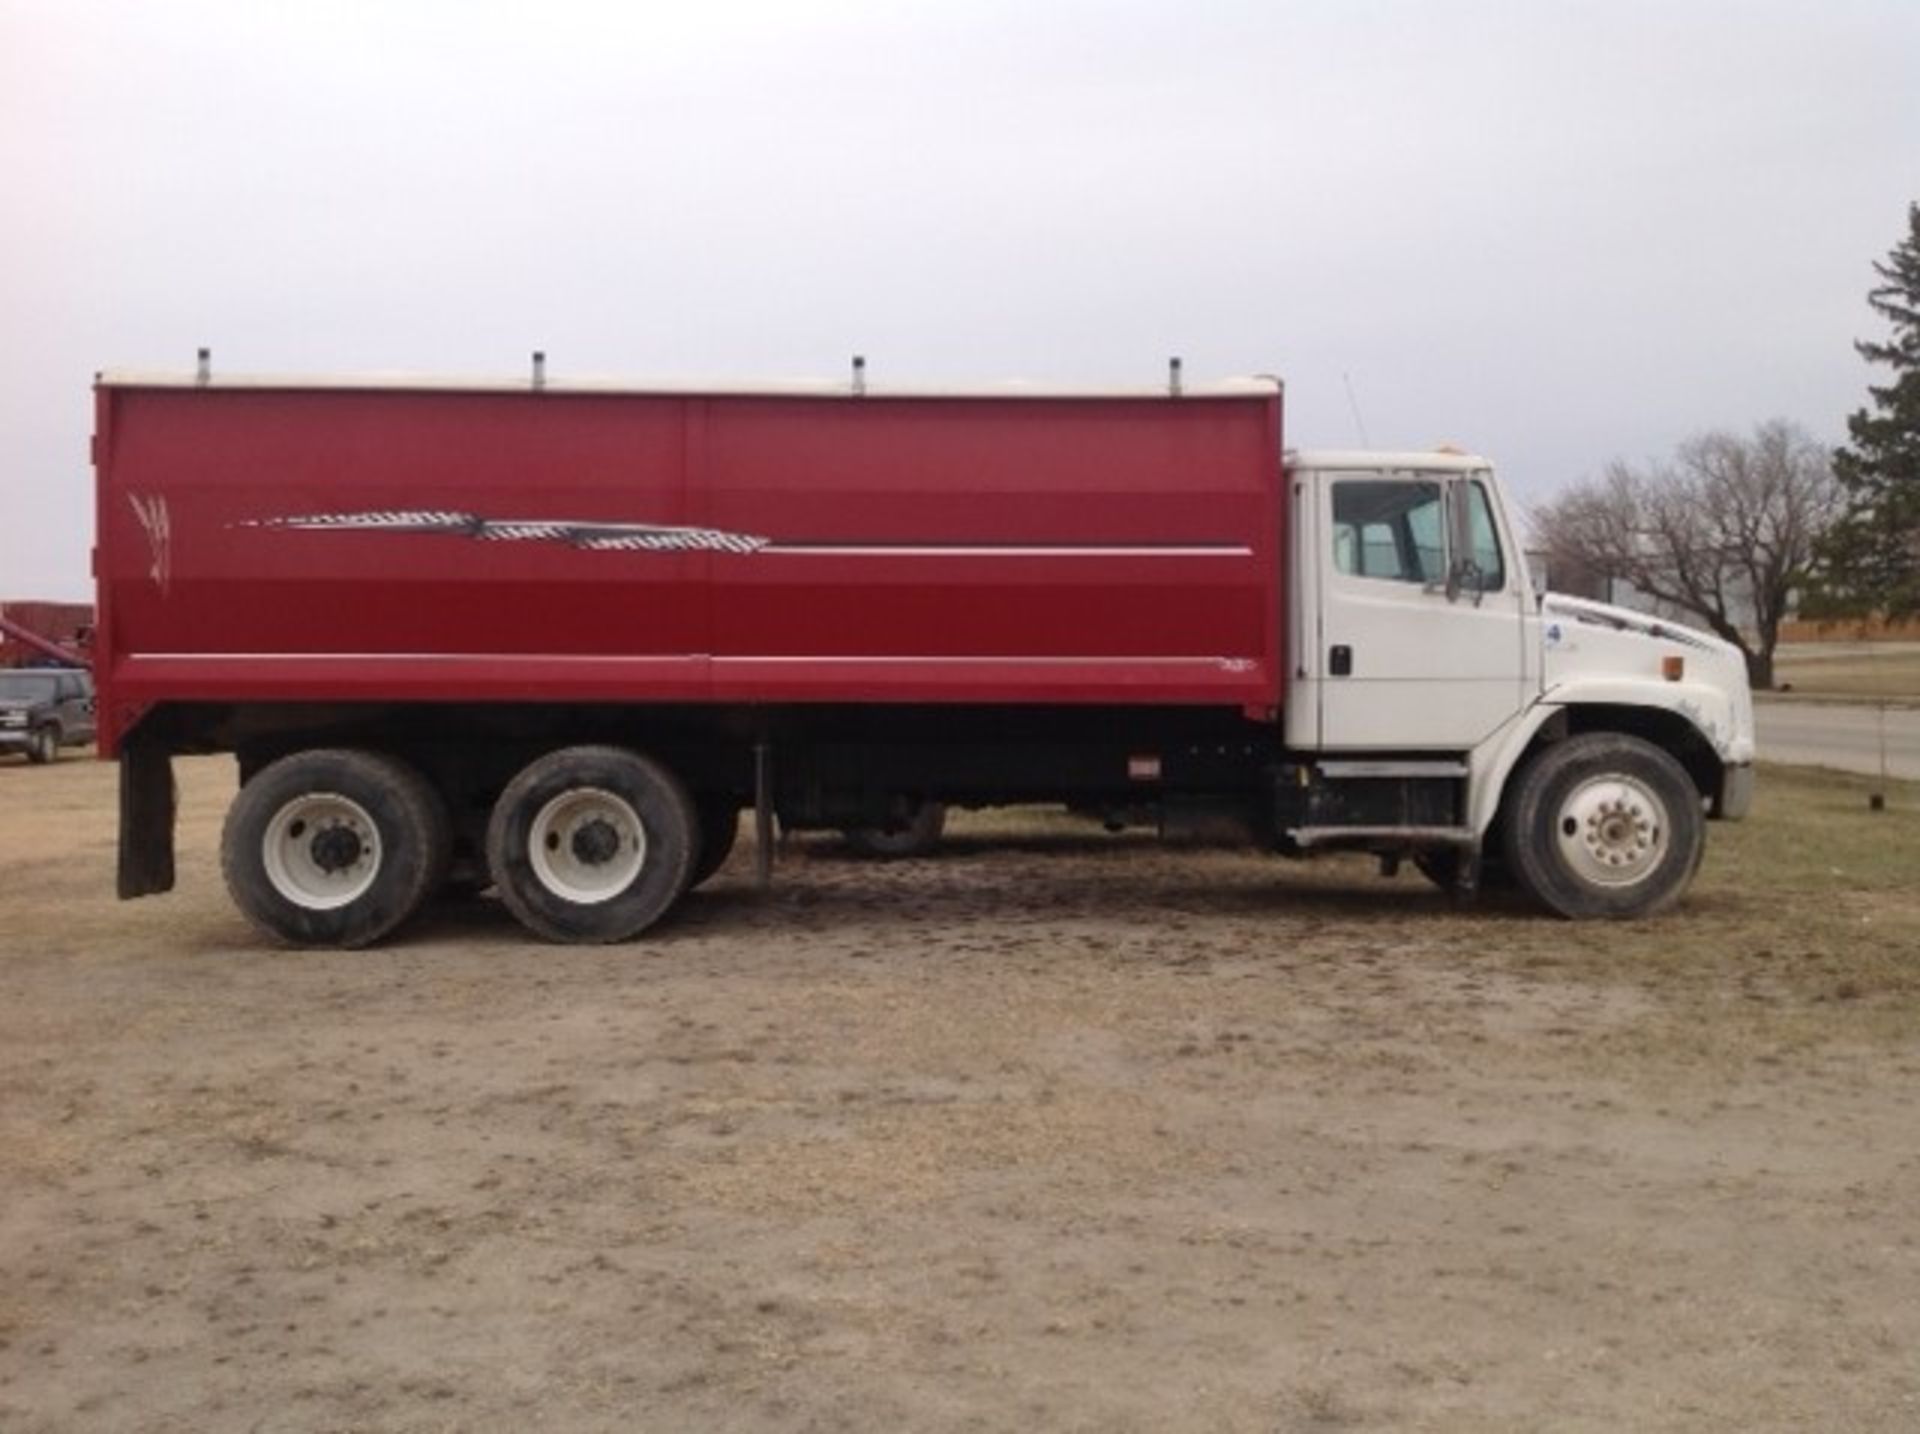 1996 Freightliner Grain truck with box and remote control hoist and end gate. Vin# 1FVX0LBBXTL710591 - Image 4 of 4